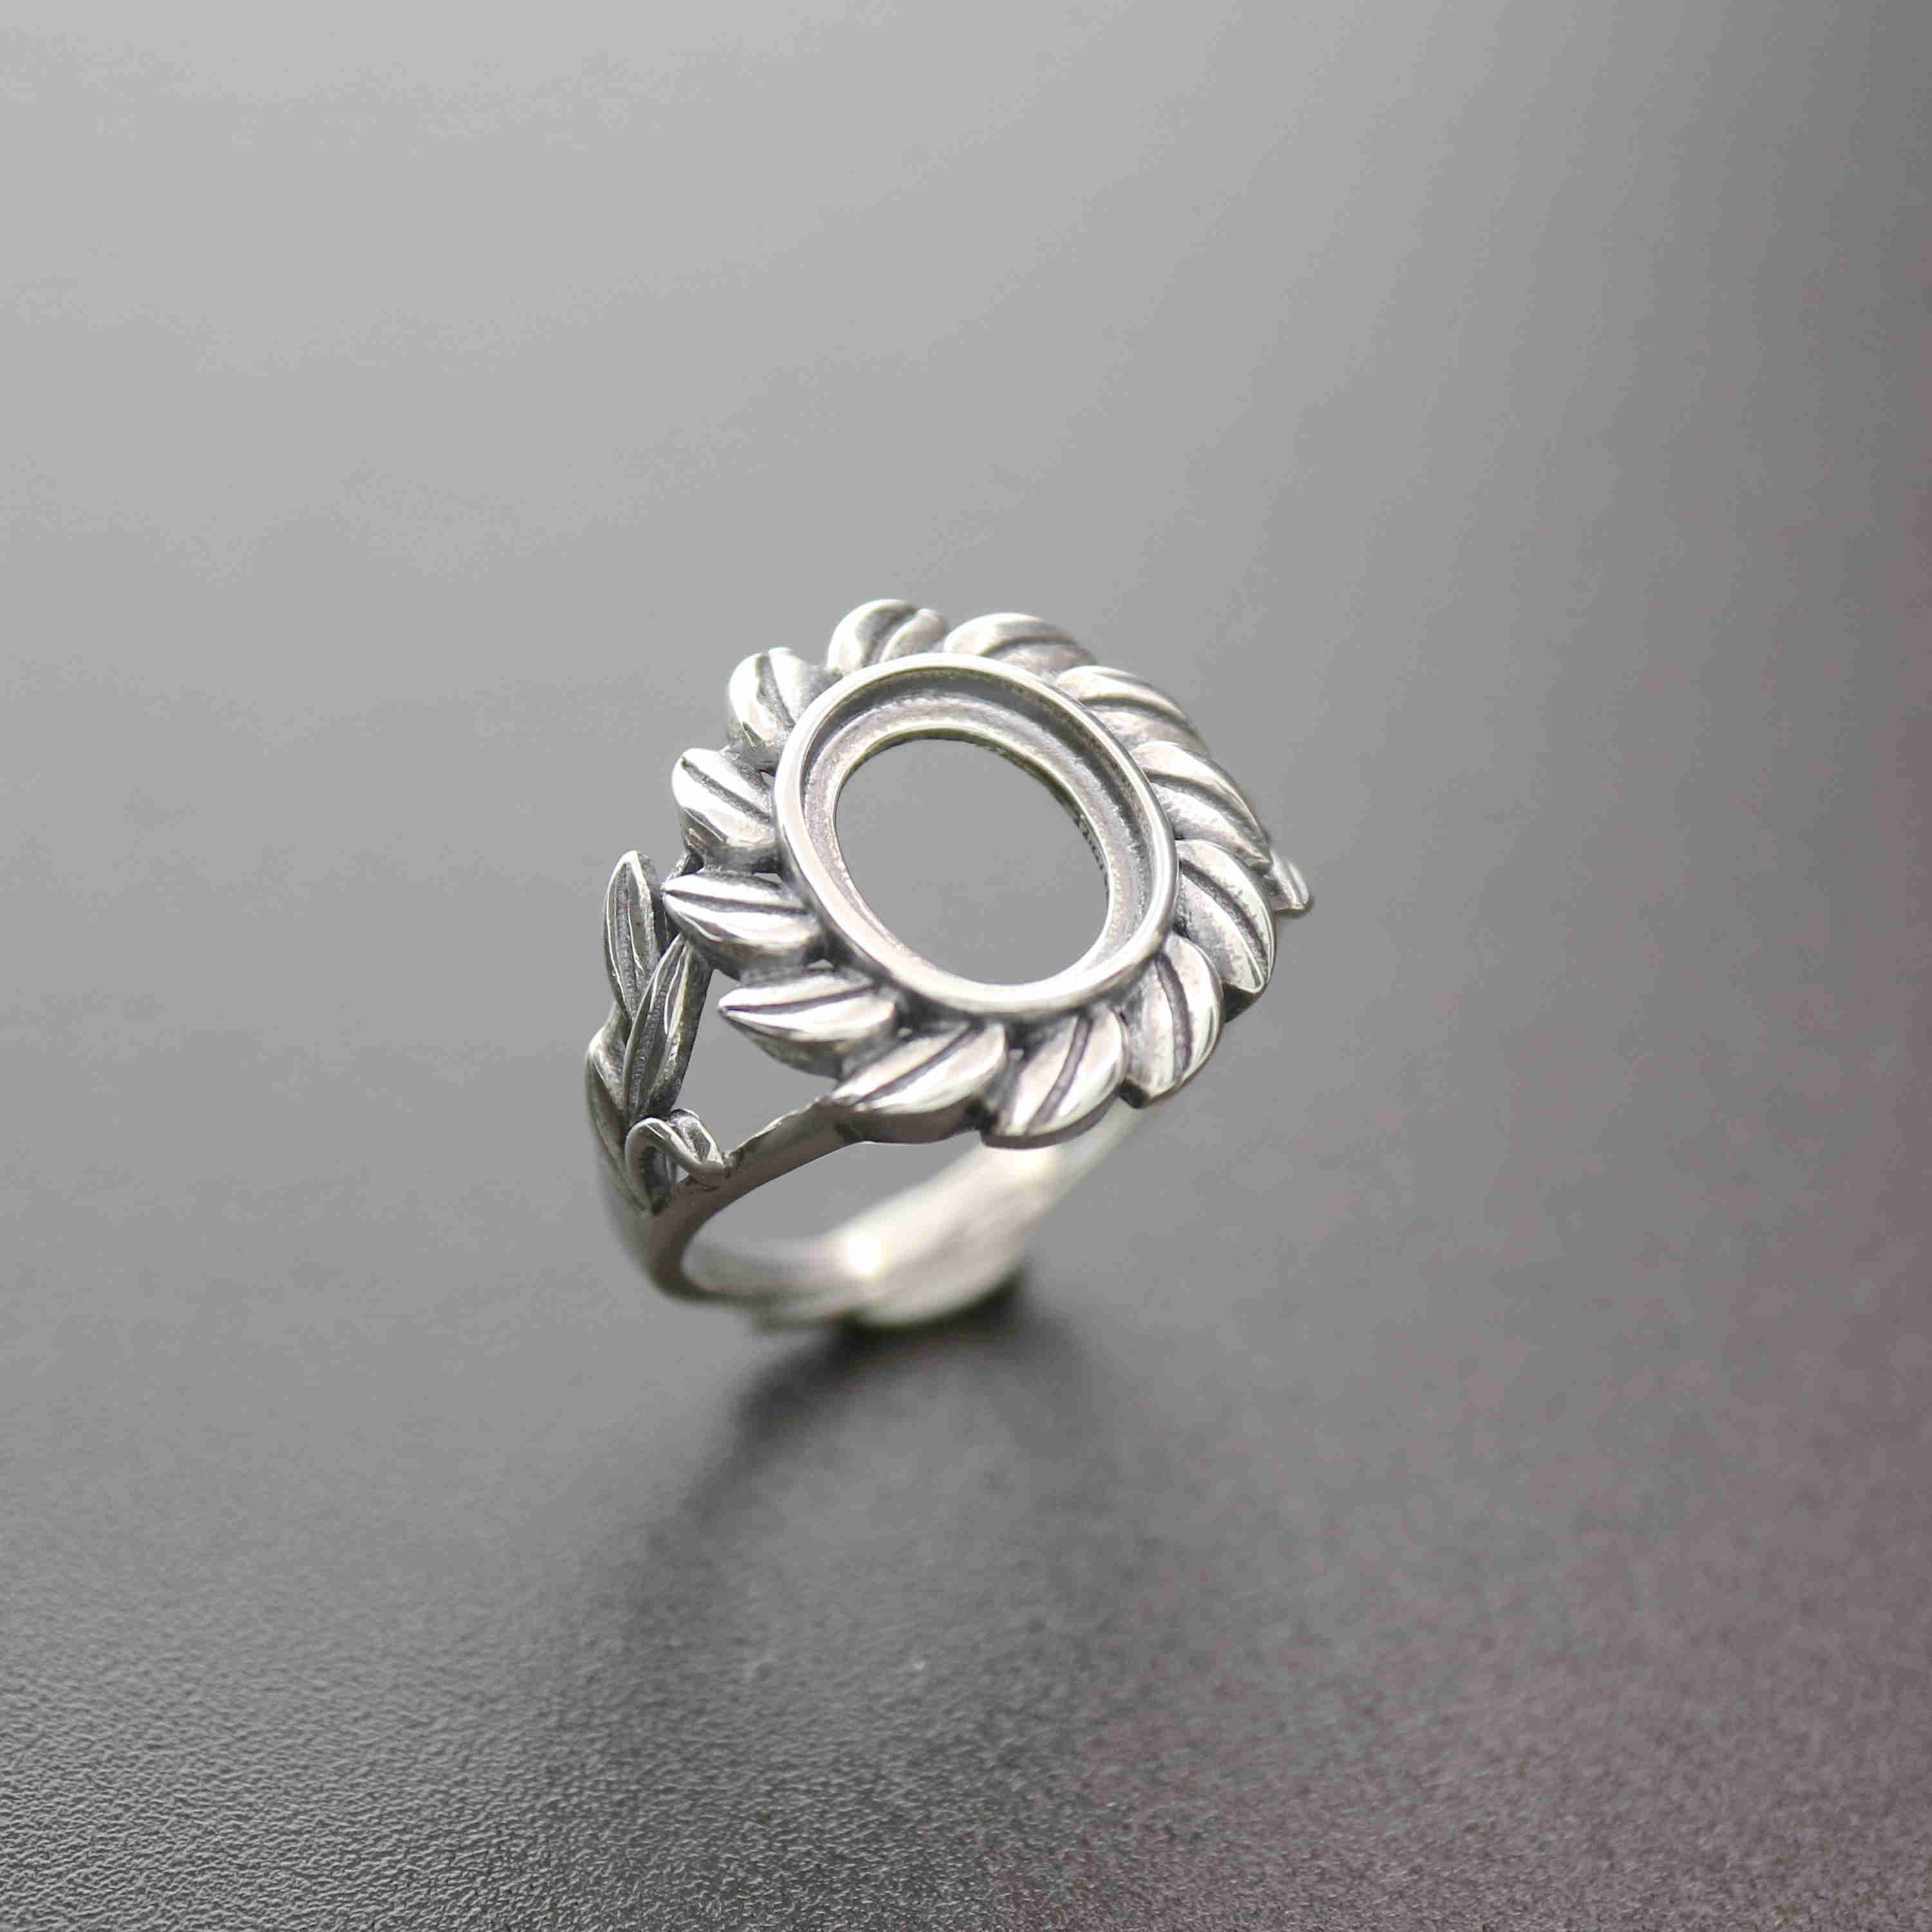 1Pcs 8X10MM Oval Cabochon Bezel Tree Leaf Antiqued Solid 925 Sterling Silver Adjustable Ring Settings 1223095 - Click Image to Close